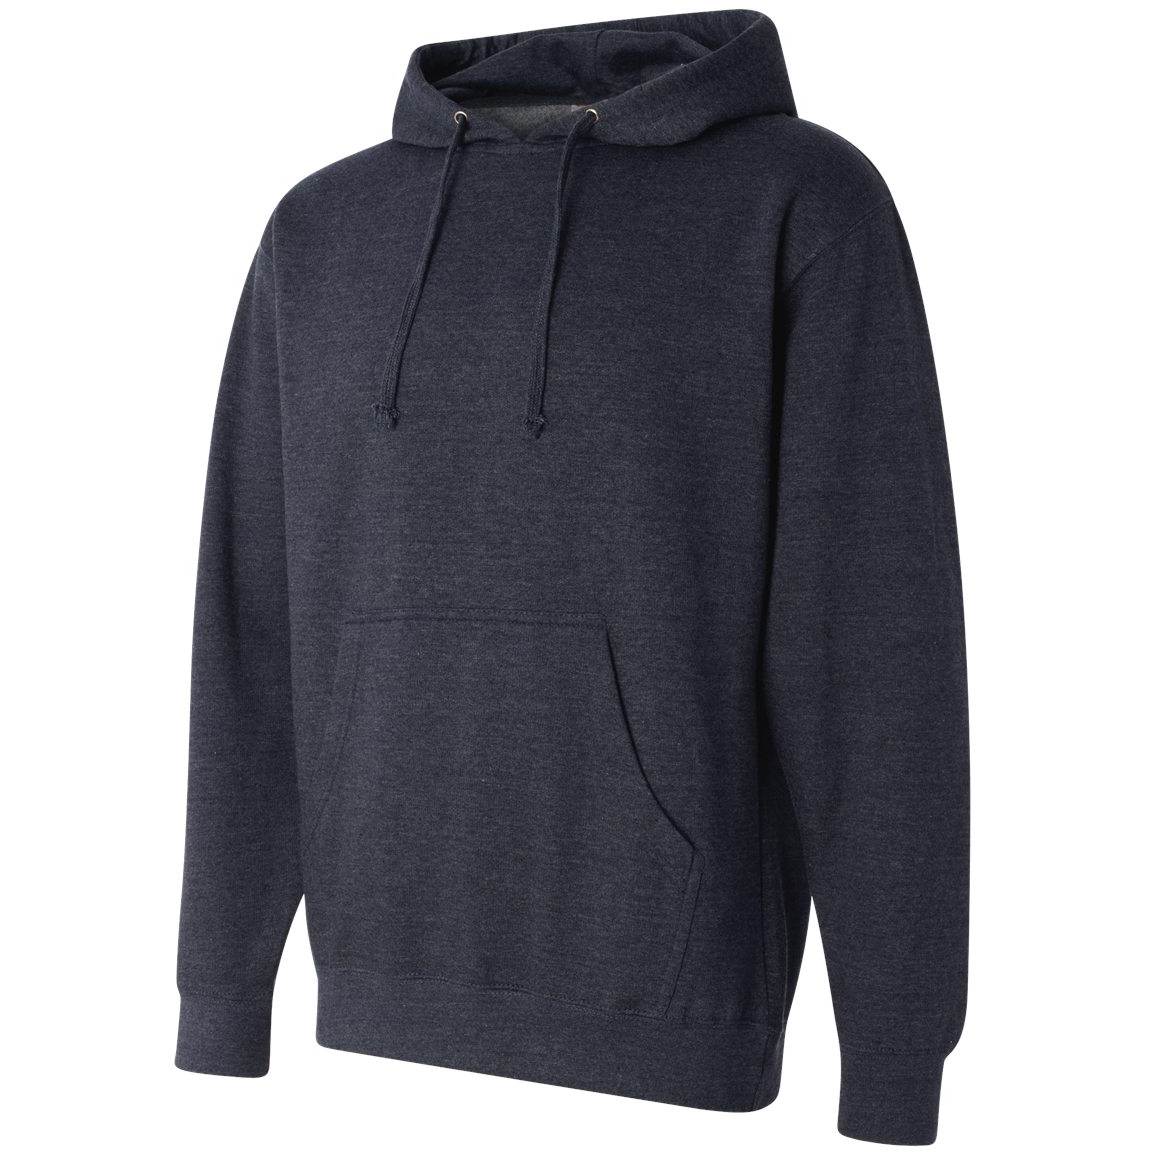 Independent Trading Co. SS4500 Midweight Hooded Sweatshirt - Classic ...